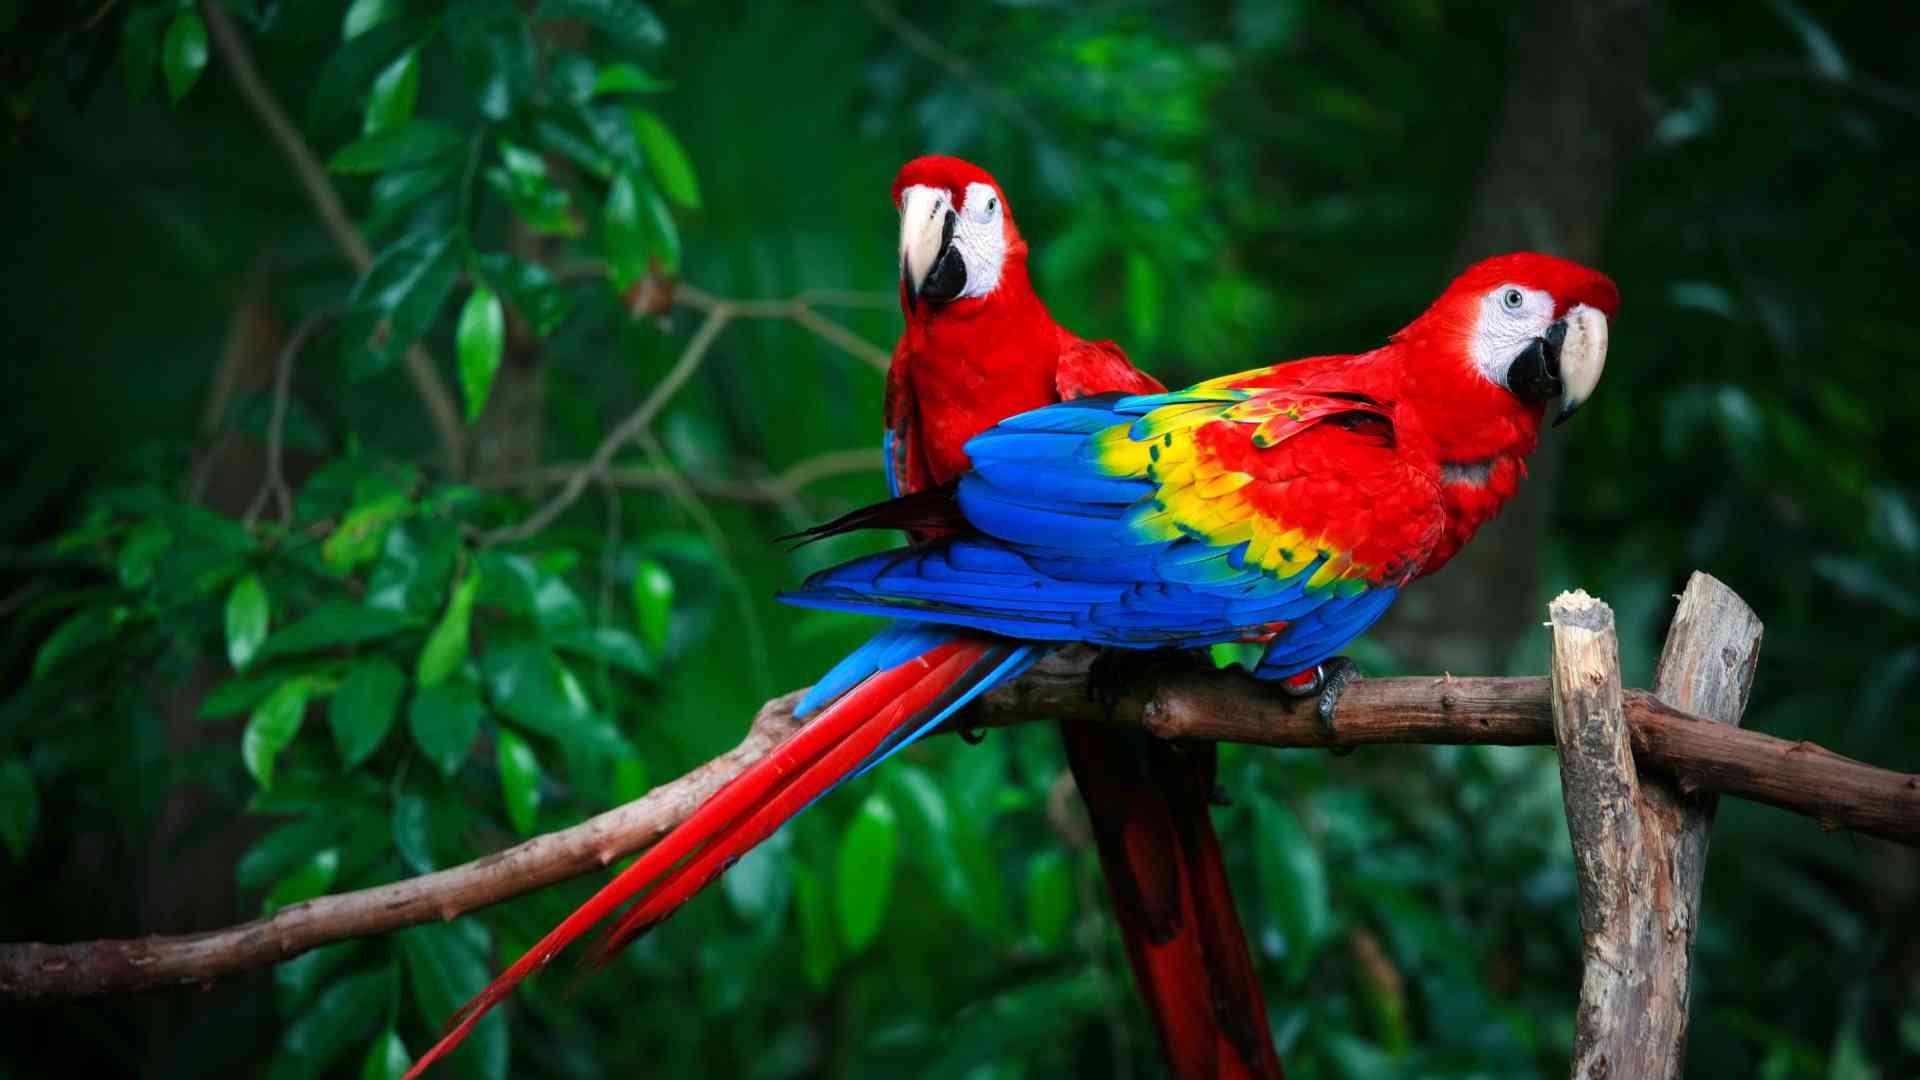 Macaw Bird Price in Chennai – Types, Health & Care Tips